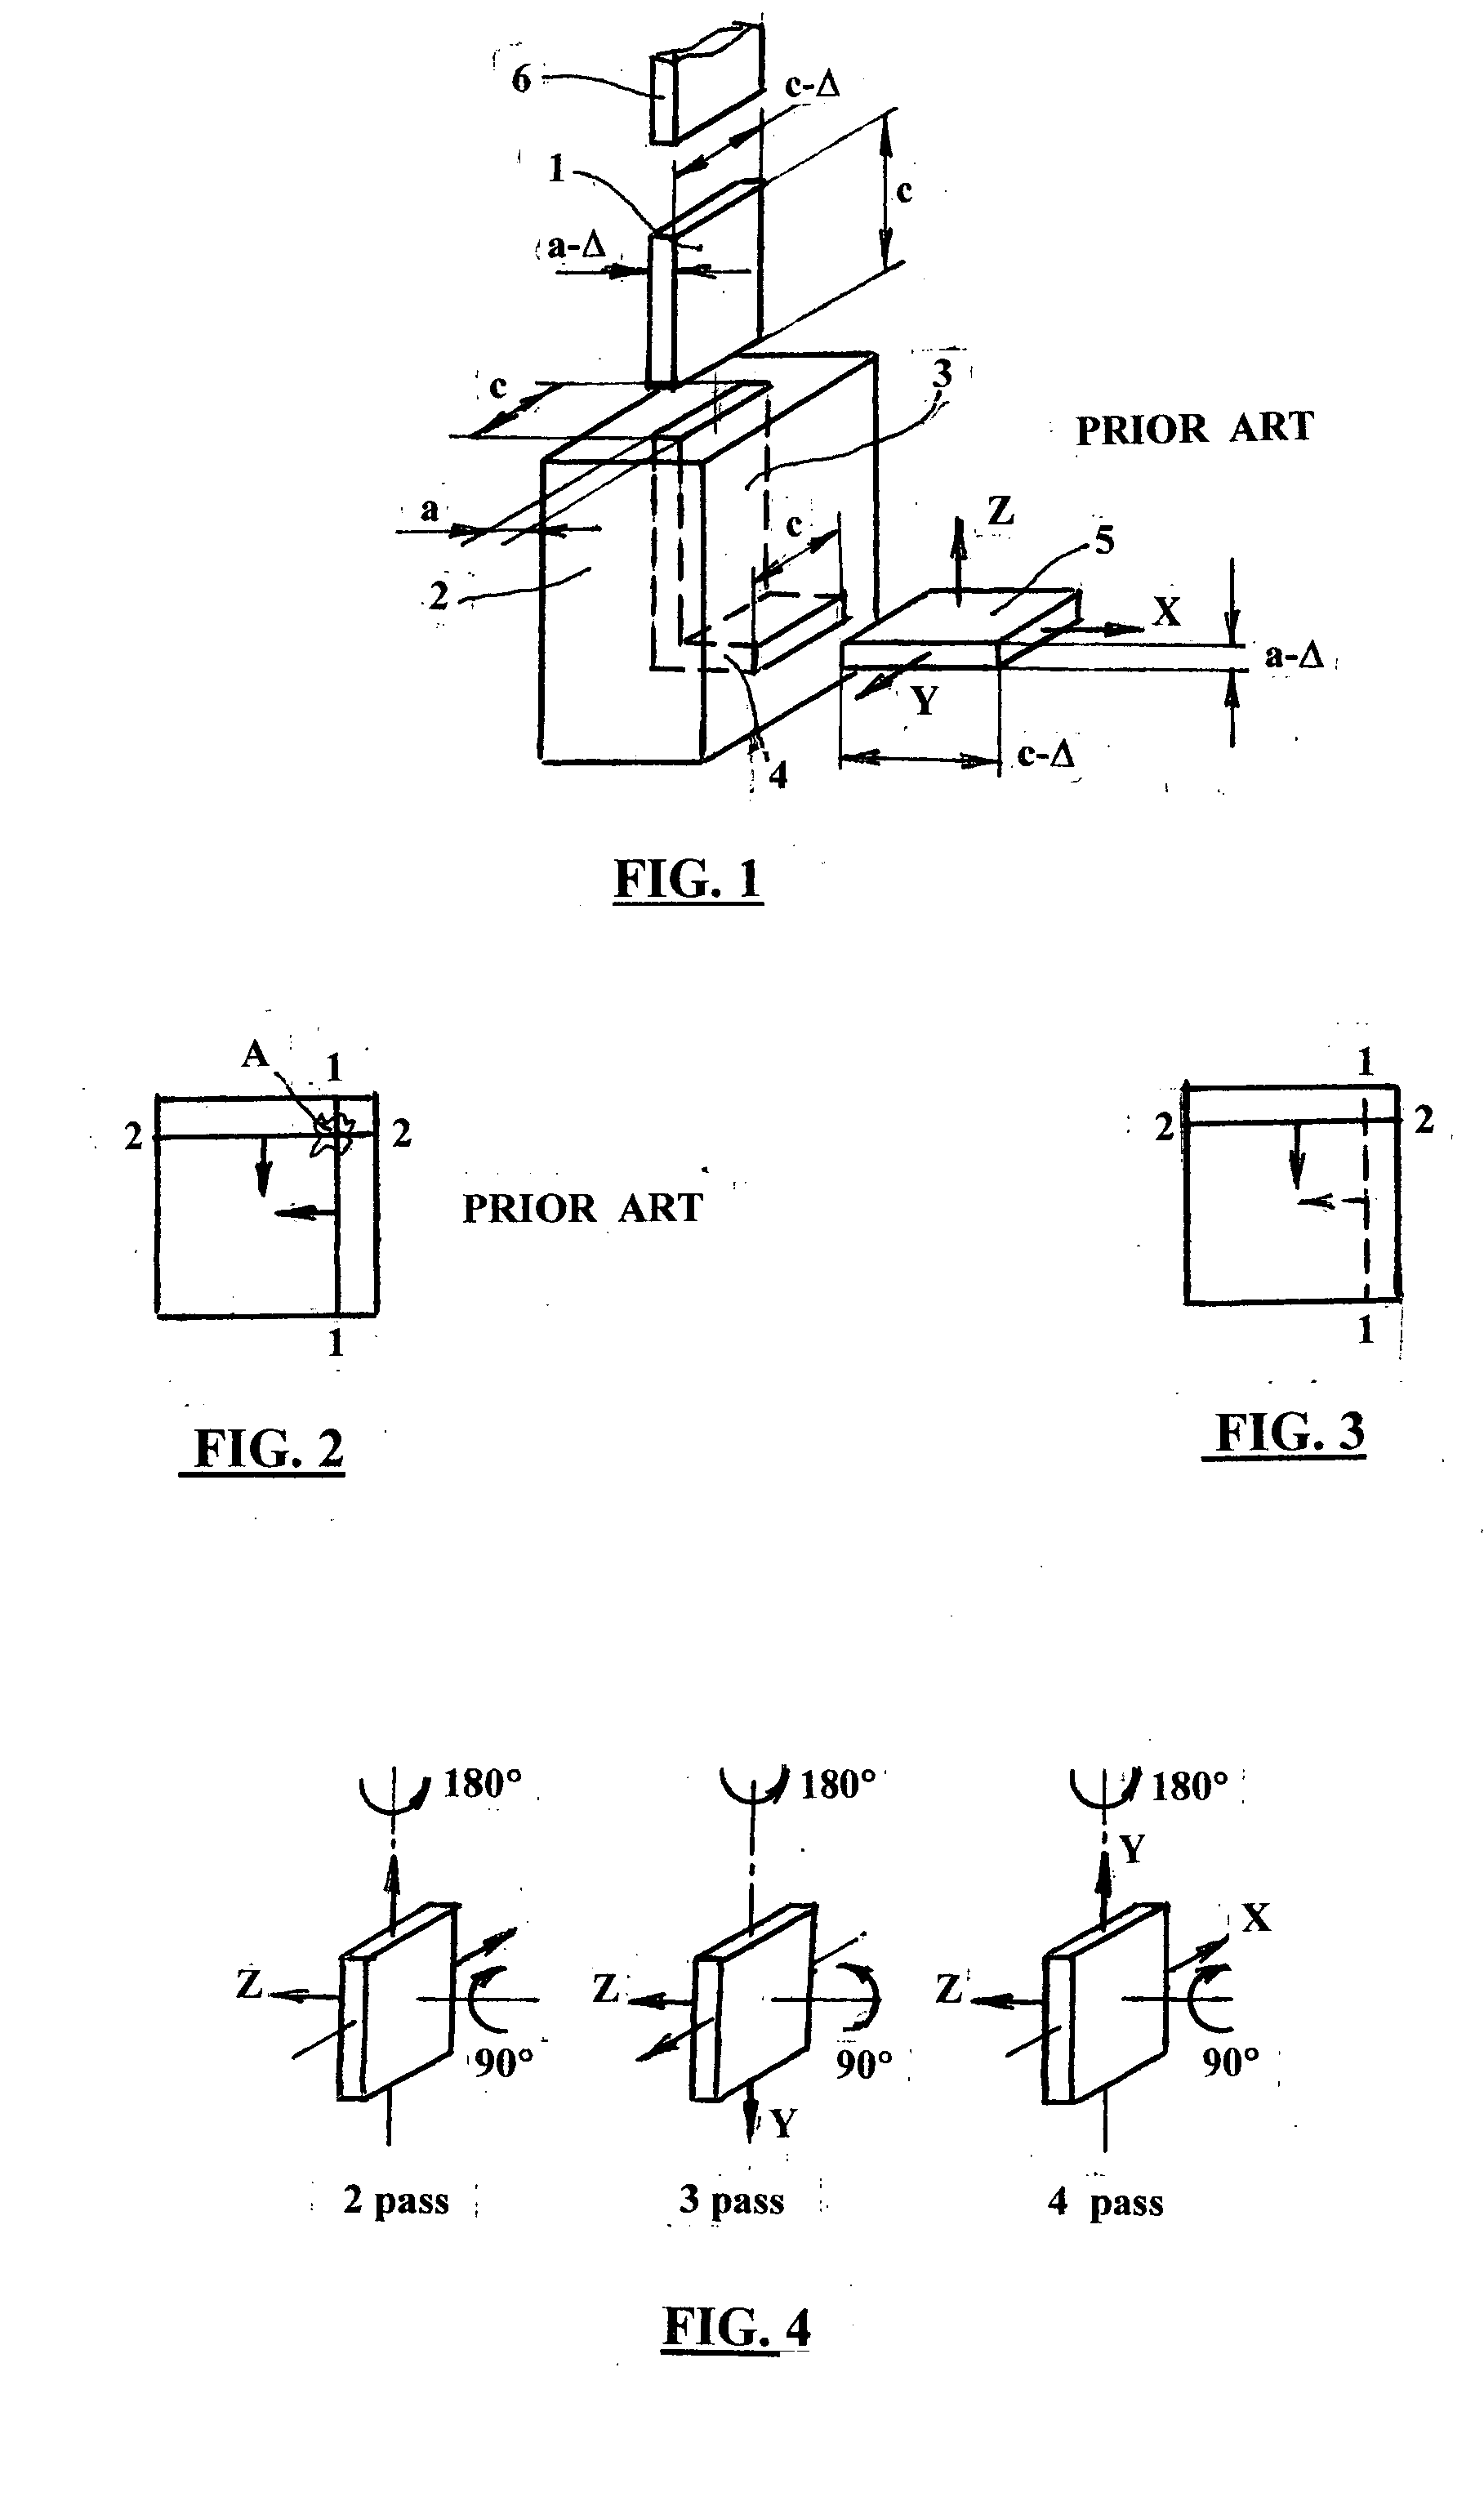 Method and apparatus for equal channel angular extrusion of flat billets